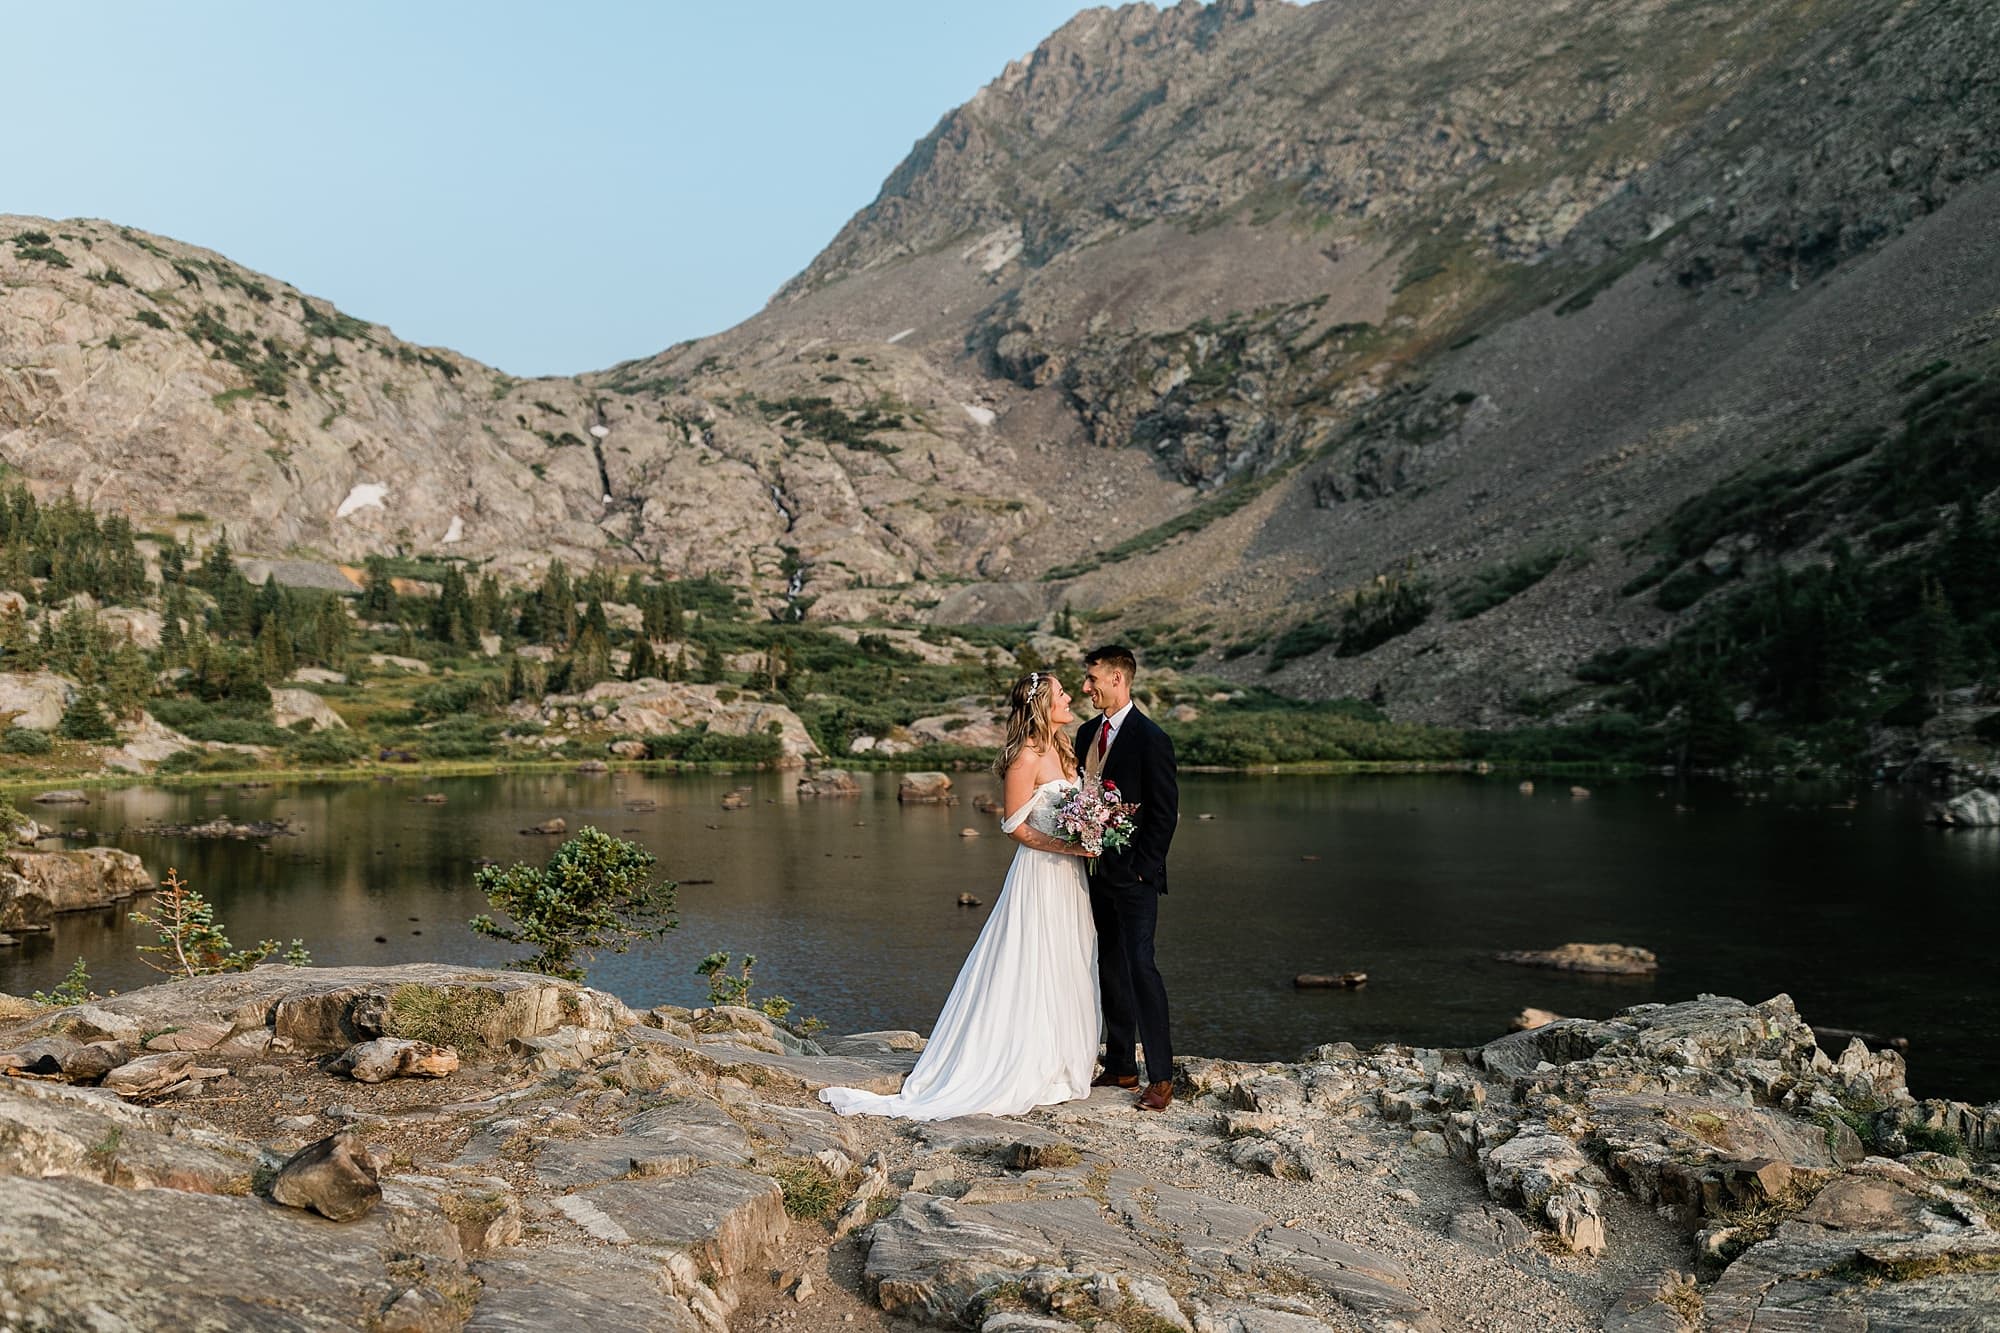 A couple poses in front of a lake in Colorado after their intimate wedding in the Rocky Mountains